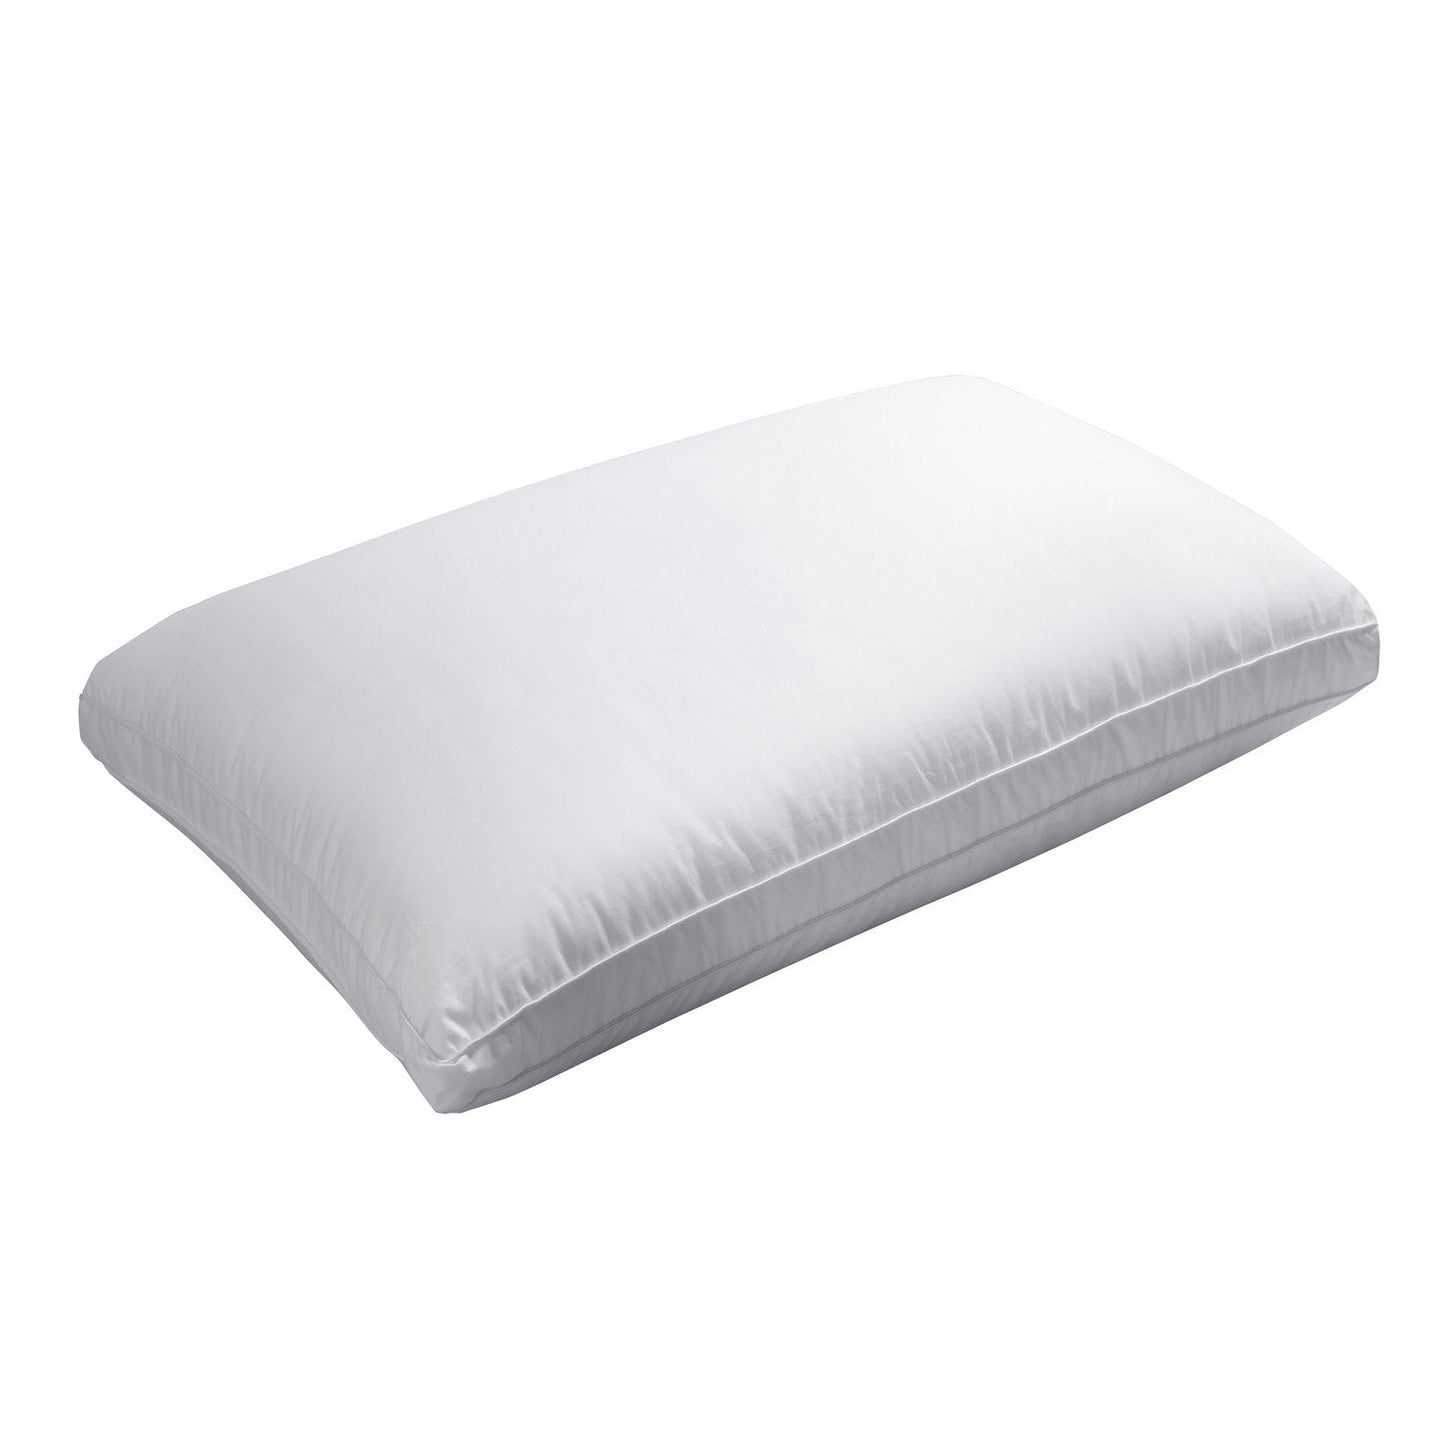 Relax Right Pure Microfibre King Pillow Profile 1700g by Bianca